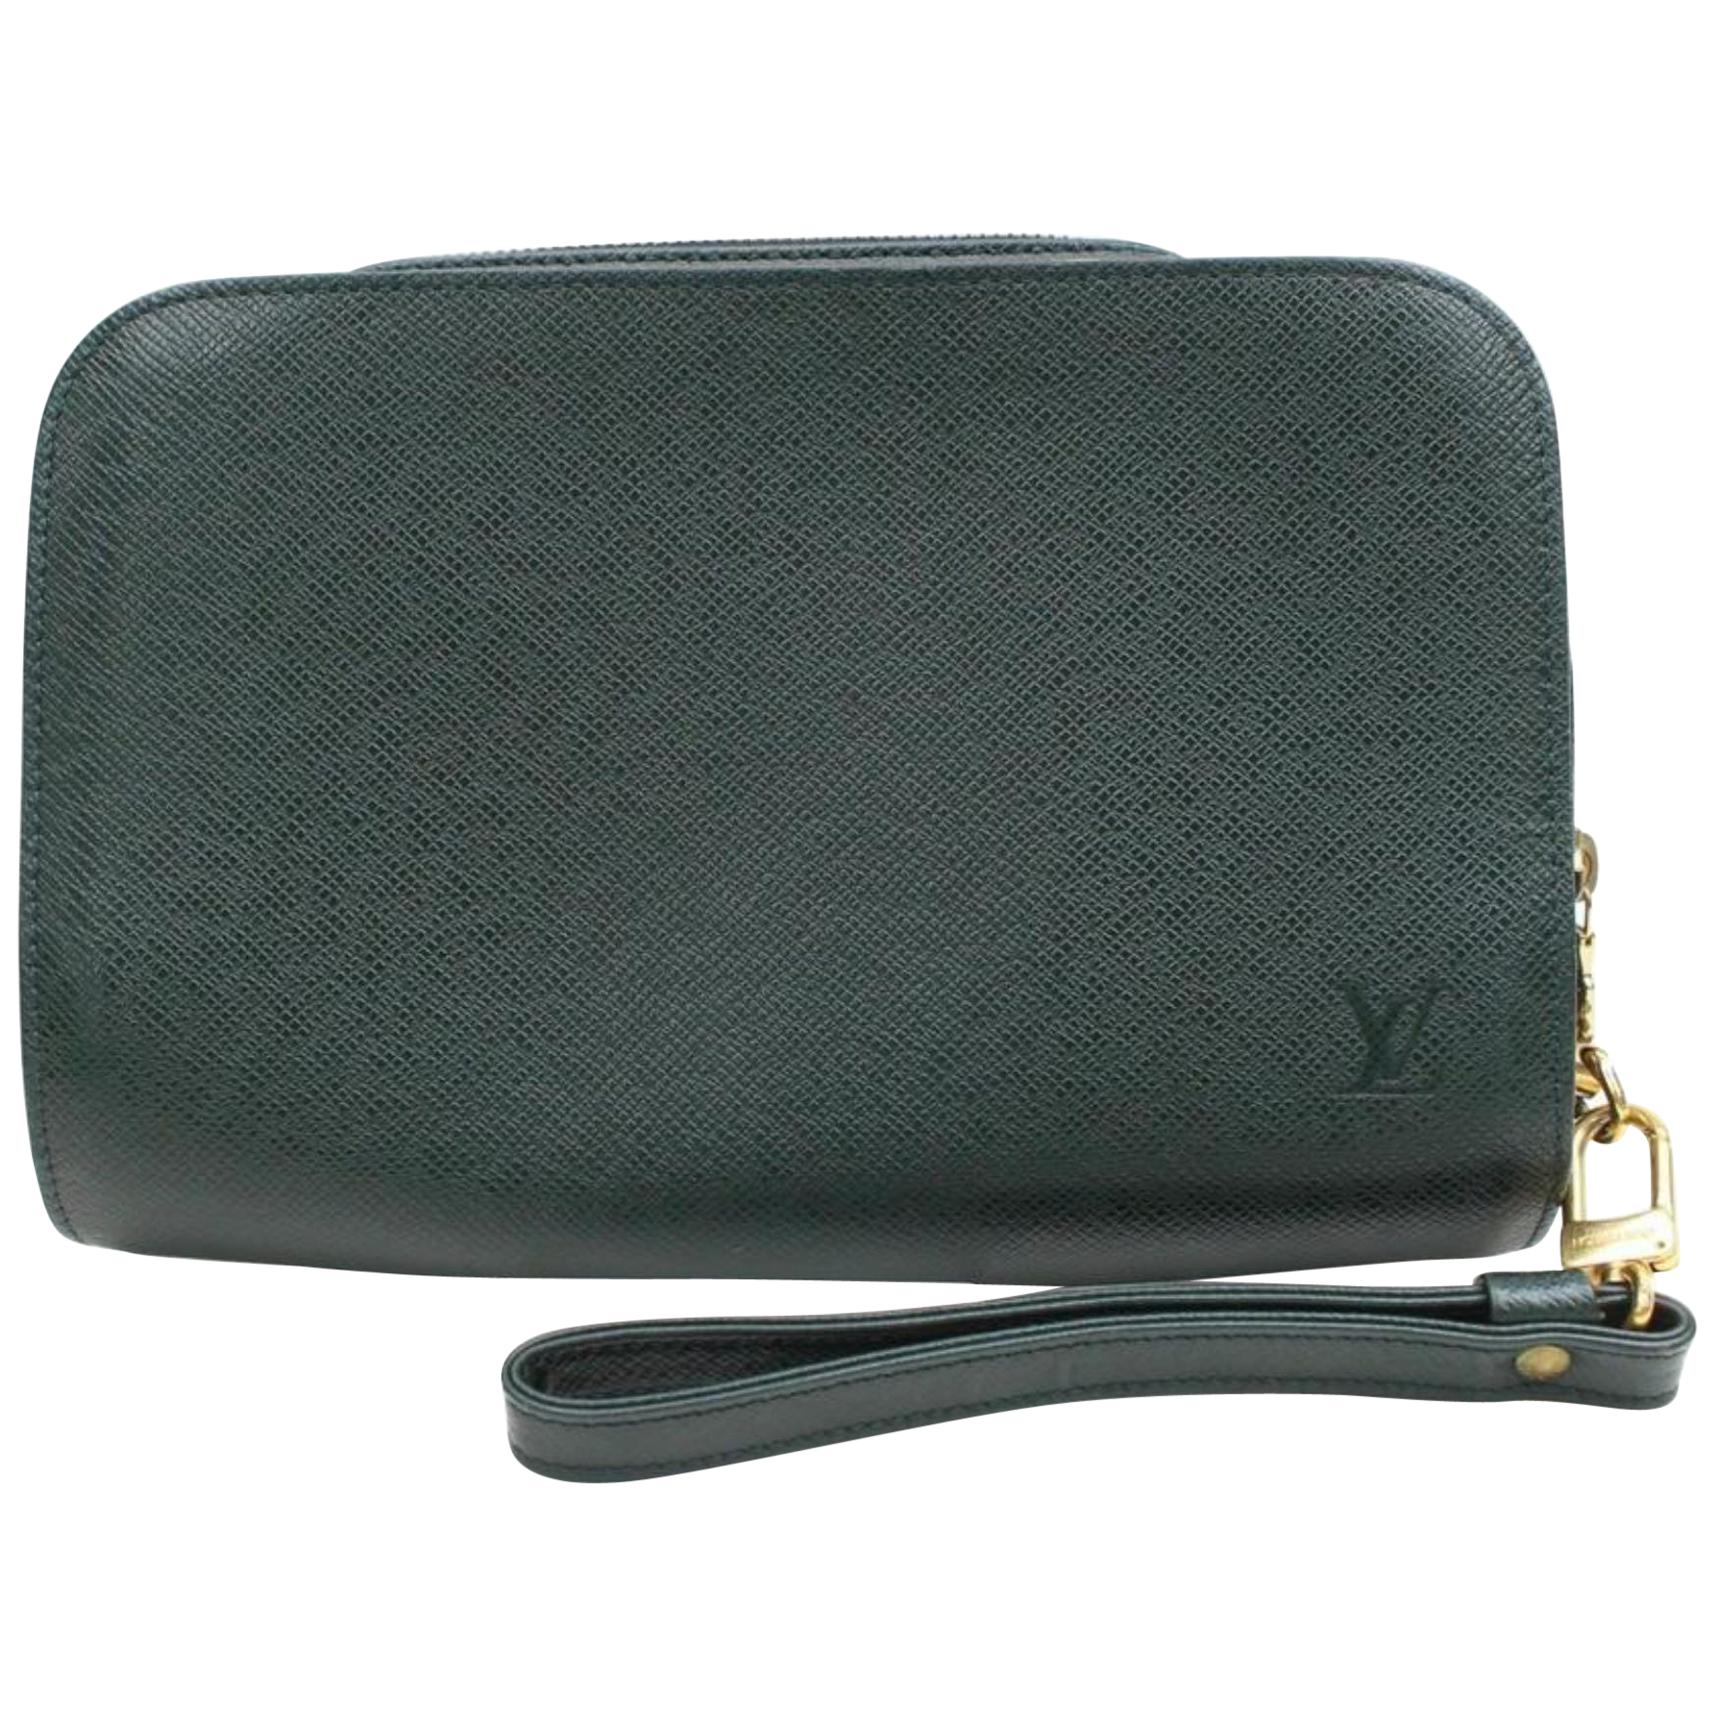 Louis Vuitton Green Orsay Epicea Taiga Leather Wristlet 868595 Cosmetic Bag For Sale